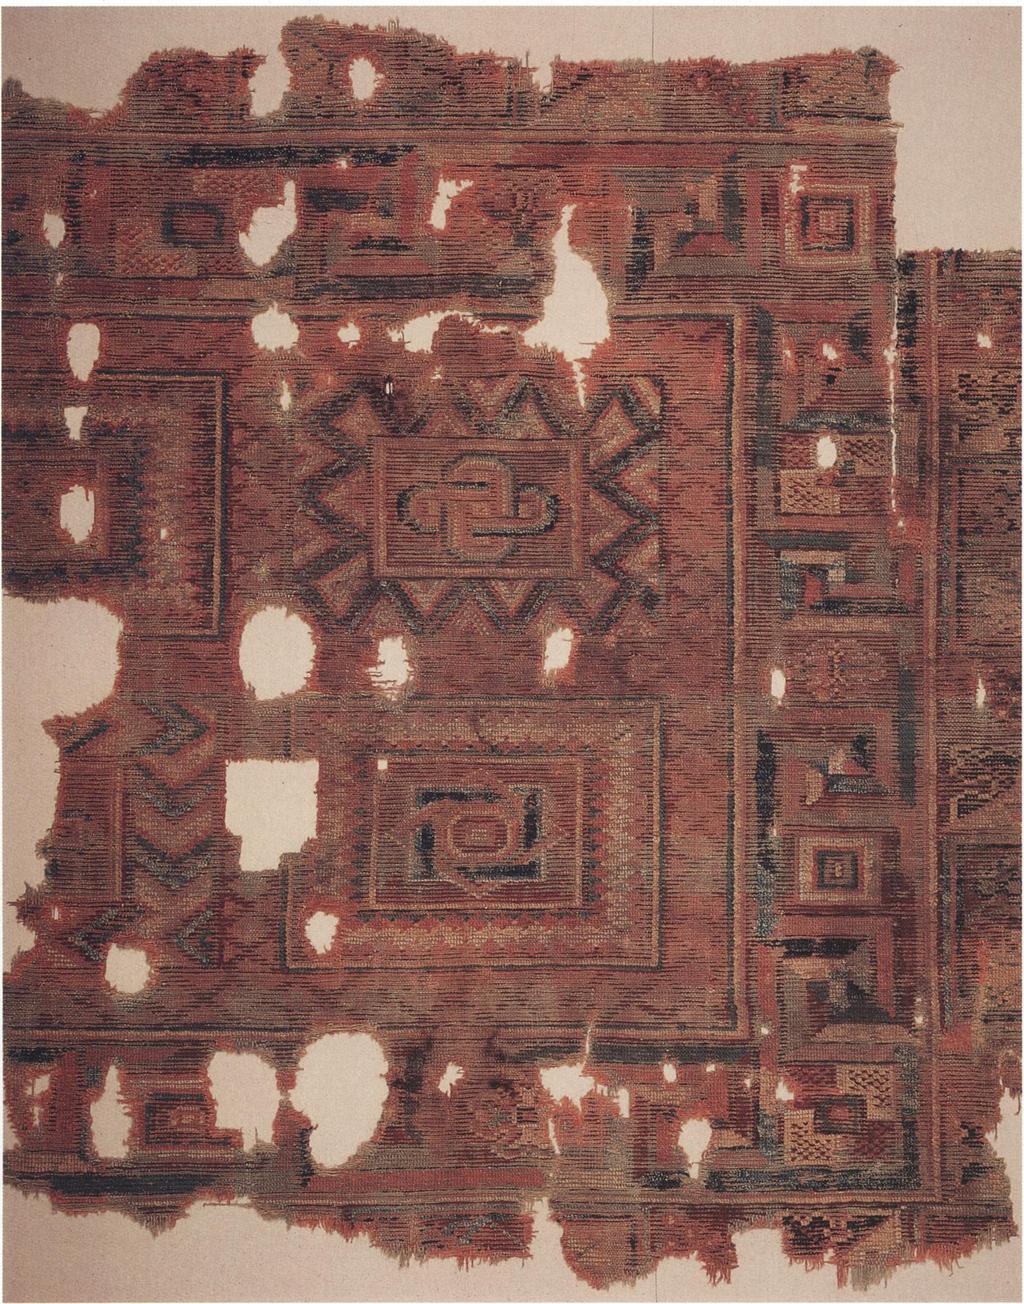 a floor cover be so direcdy linked, as this one is, to decorative floor patterns.